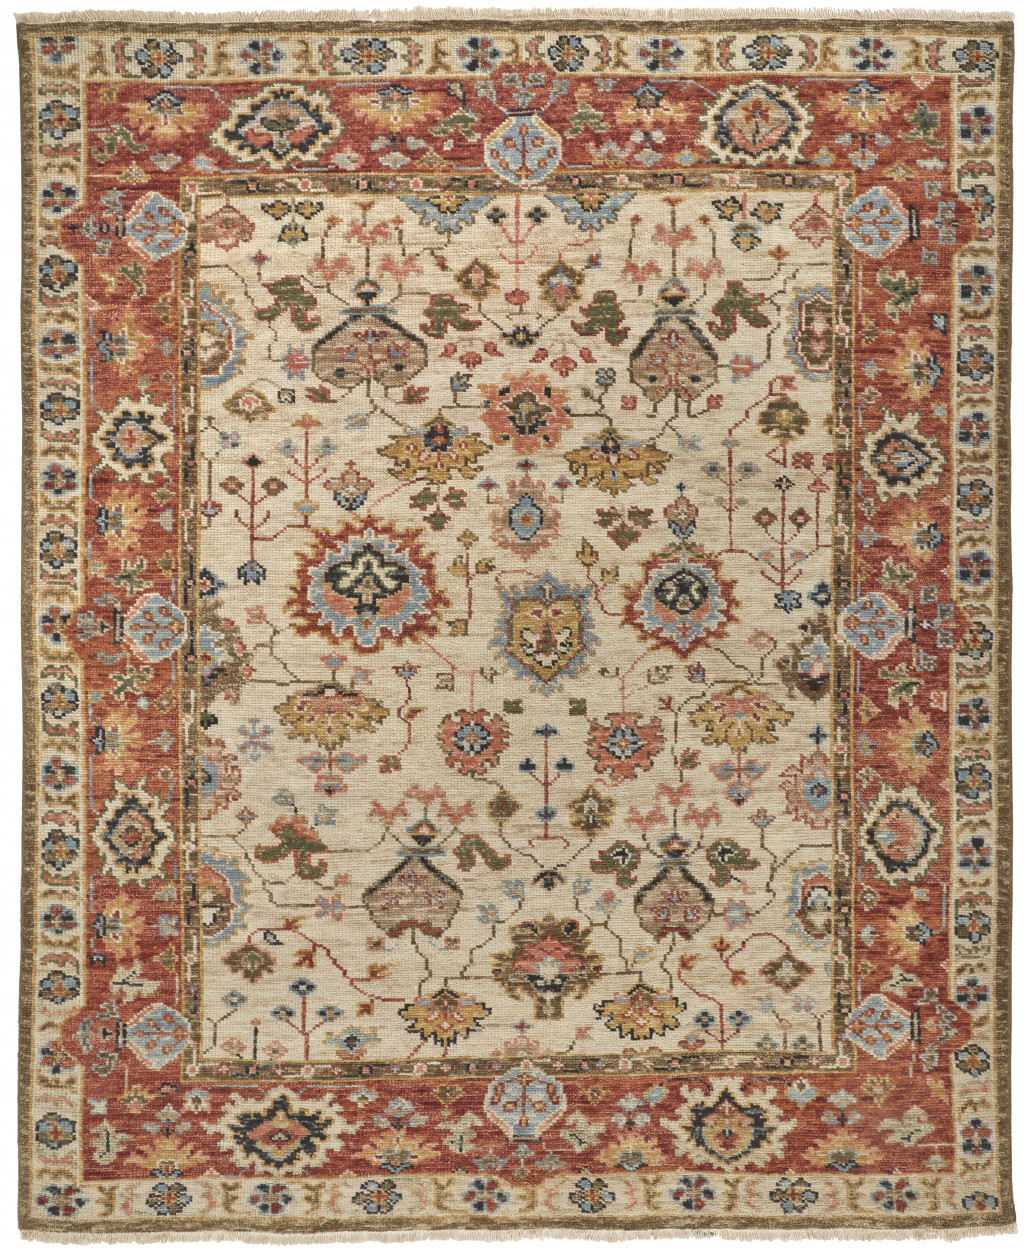 5' X 8' Ivory Red And Blue Wool Floral Hand Knotted Stain Resistant Area Rug-512653-1